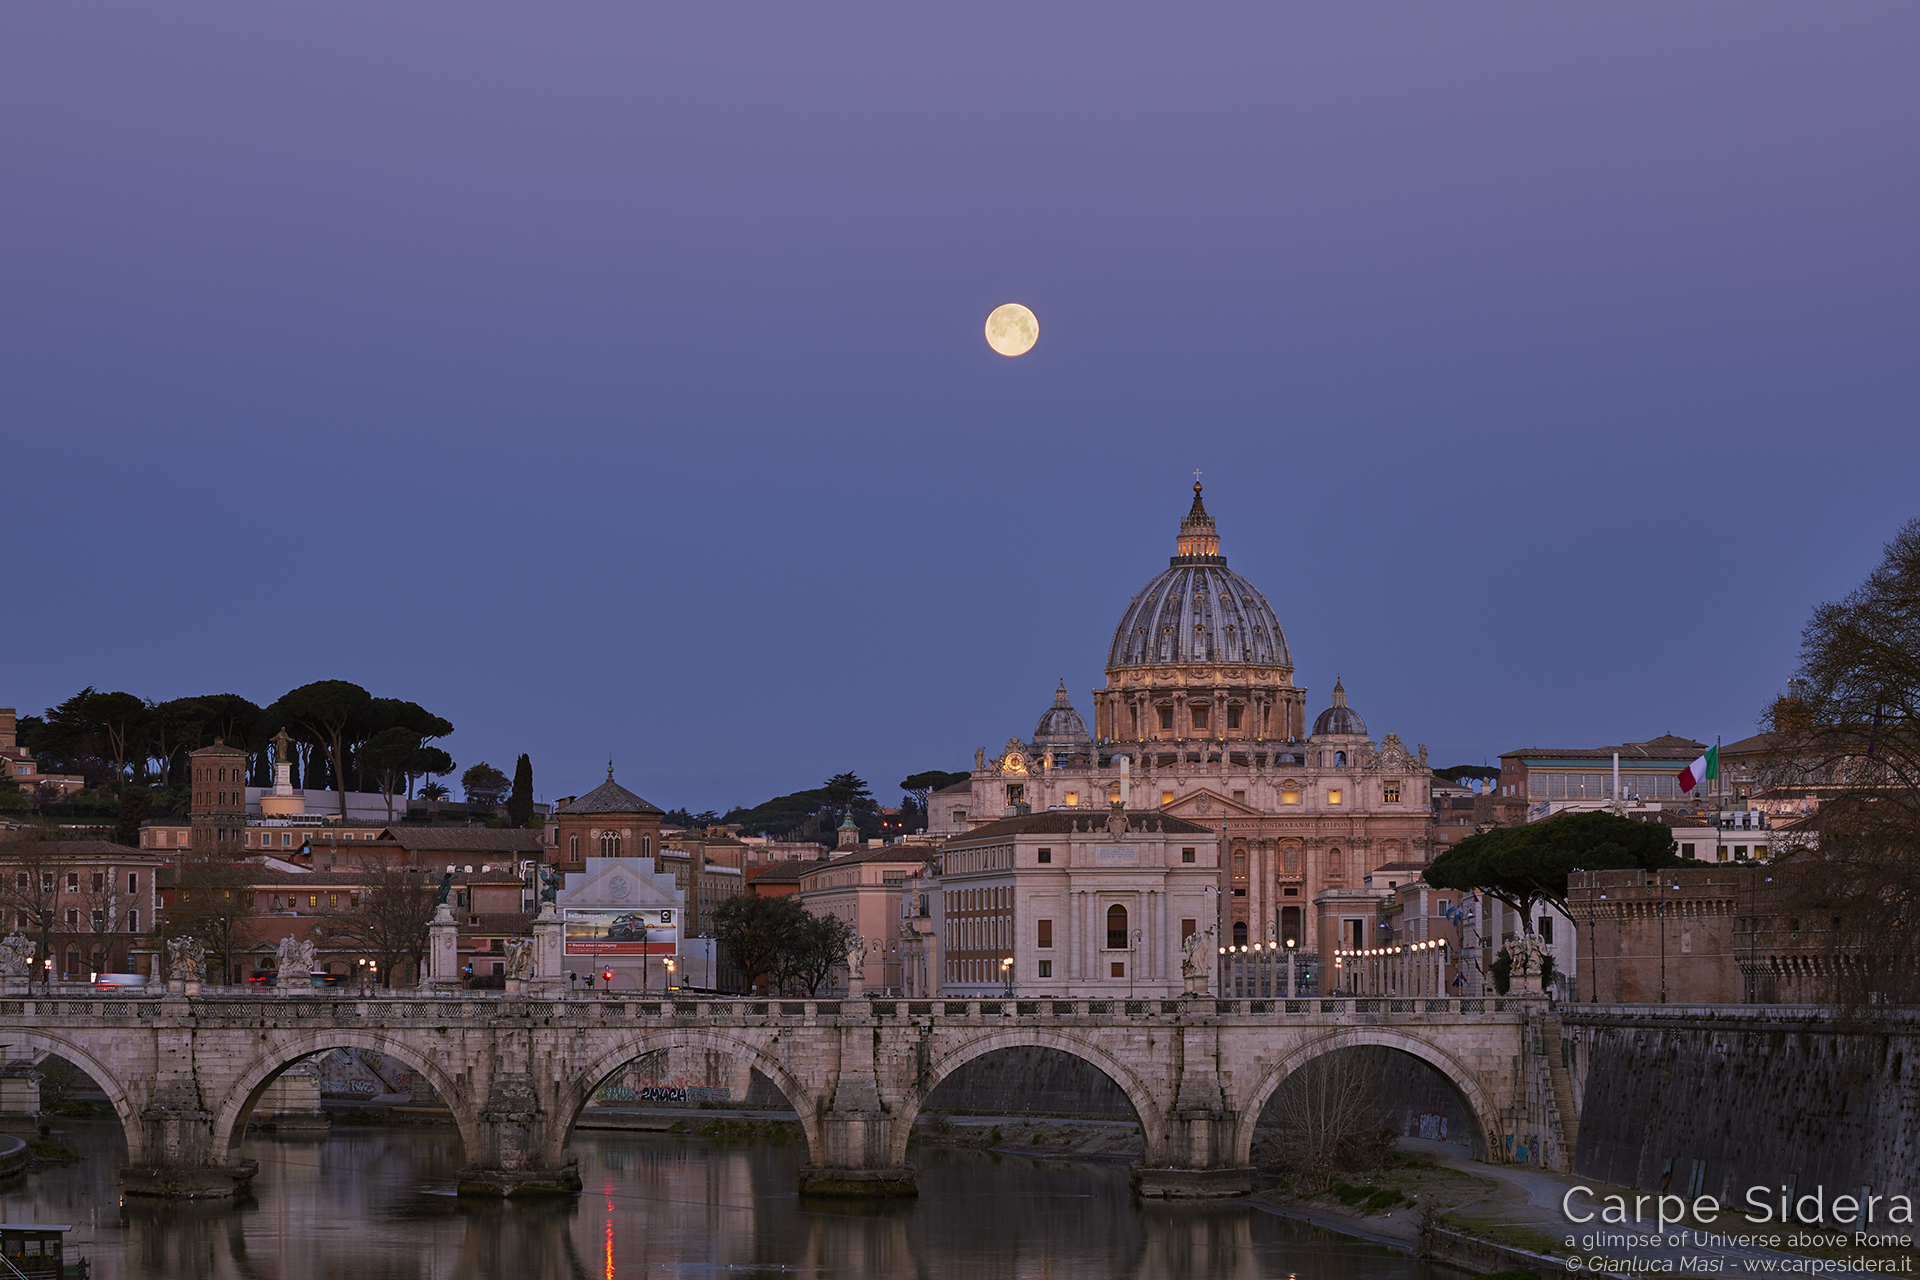 The Supermoon hangs above St. Peter's Dome in Rome, at dawn, with a bueatiful “Venus belt”, the pink horizontal band on the top - 21 Mar. 2019